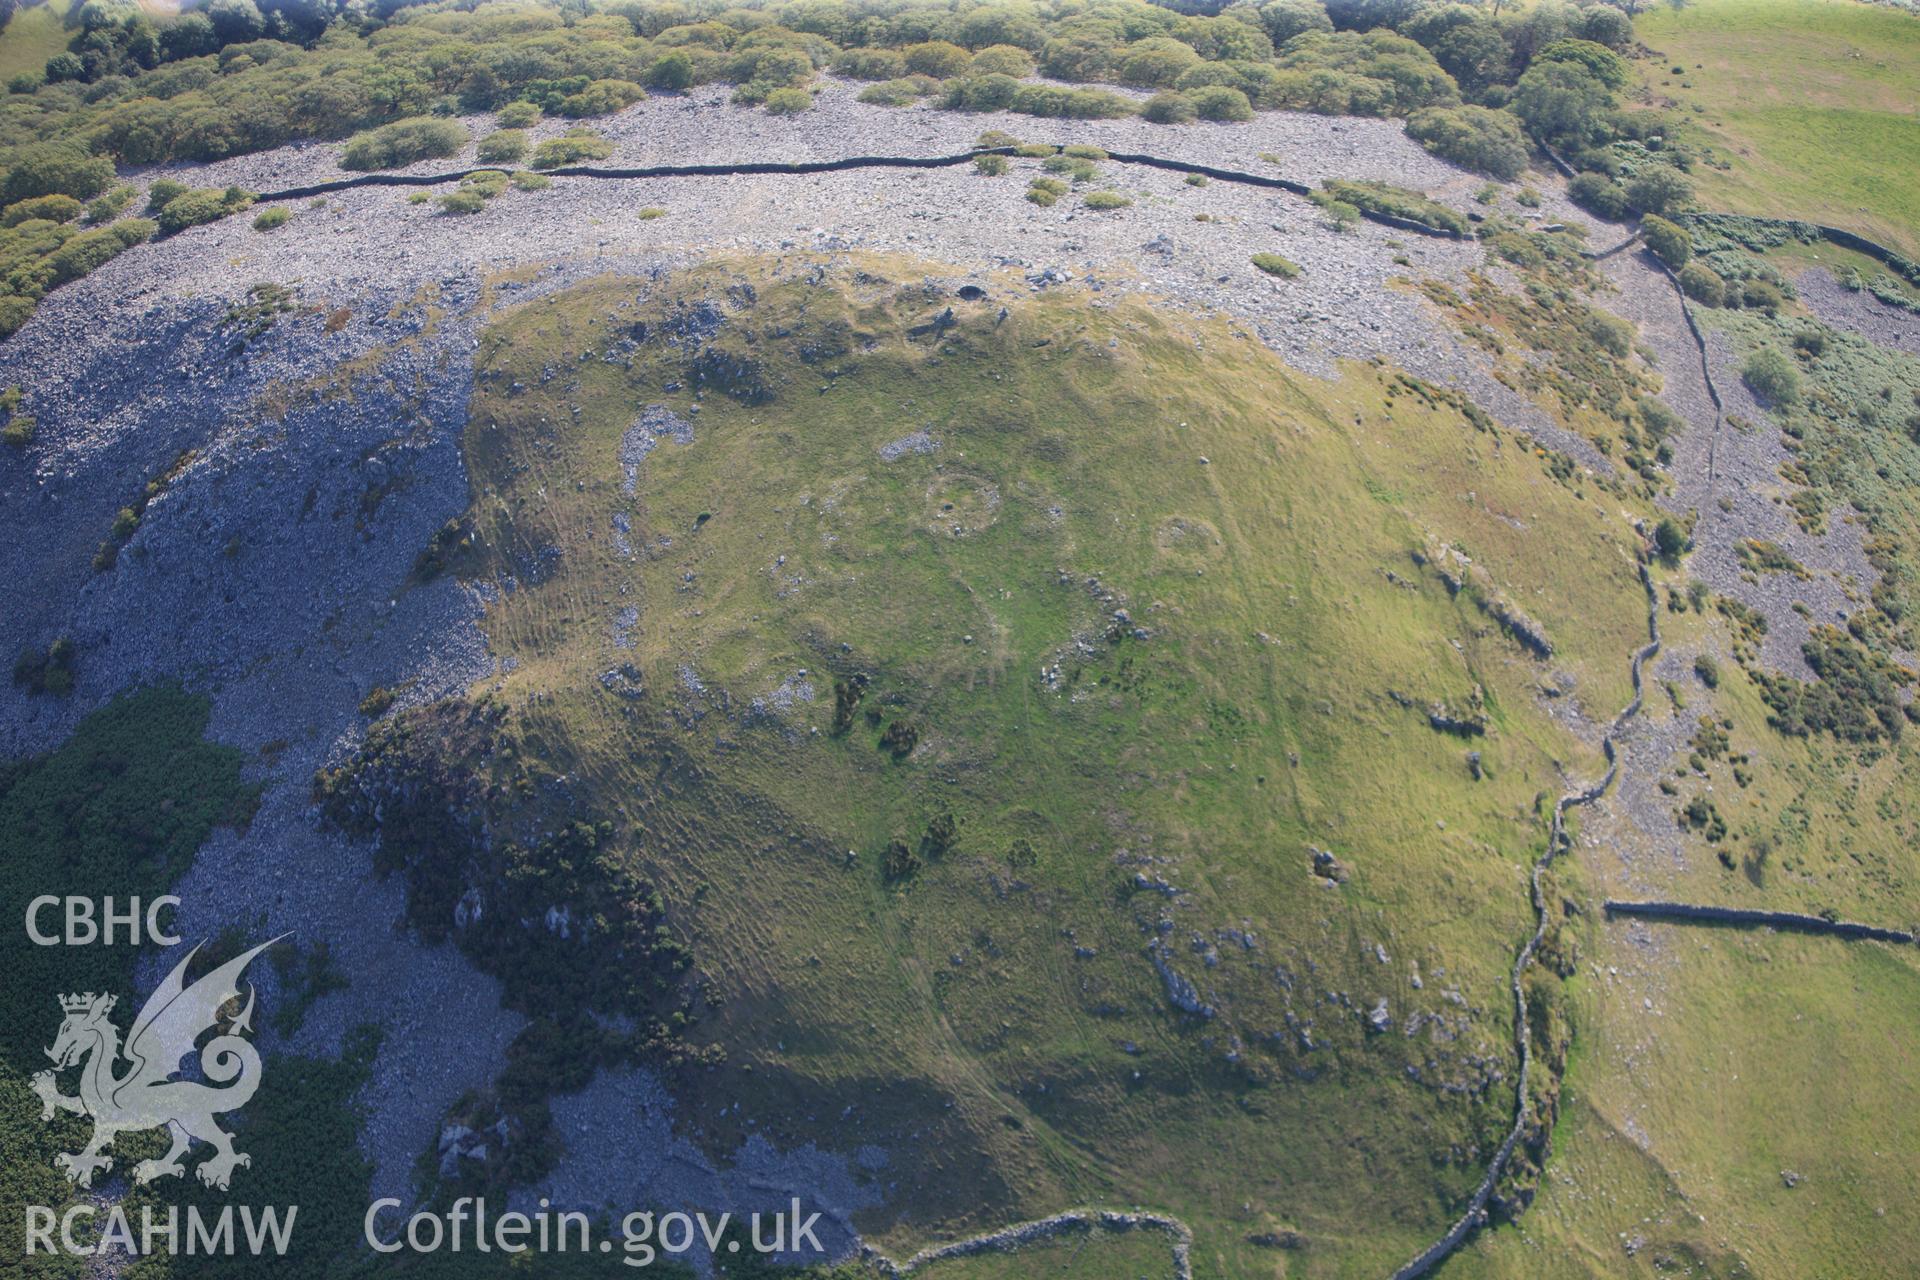 RCAHMW colour oblique photograph of Dinas Camp, Llanfairfechan. Taken by Toby Driver and Oliver Davies on 27/07/2011.